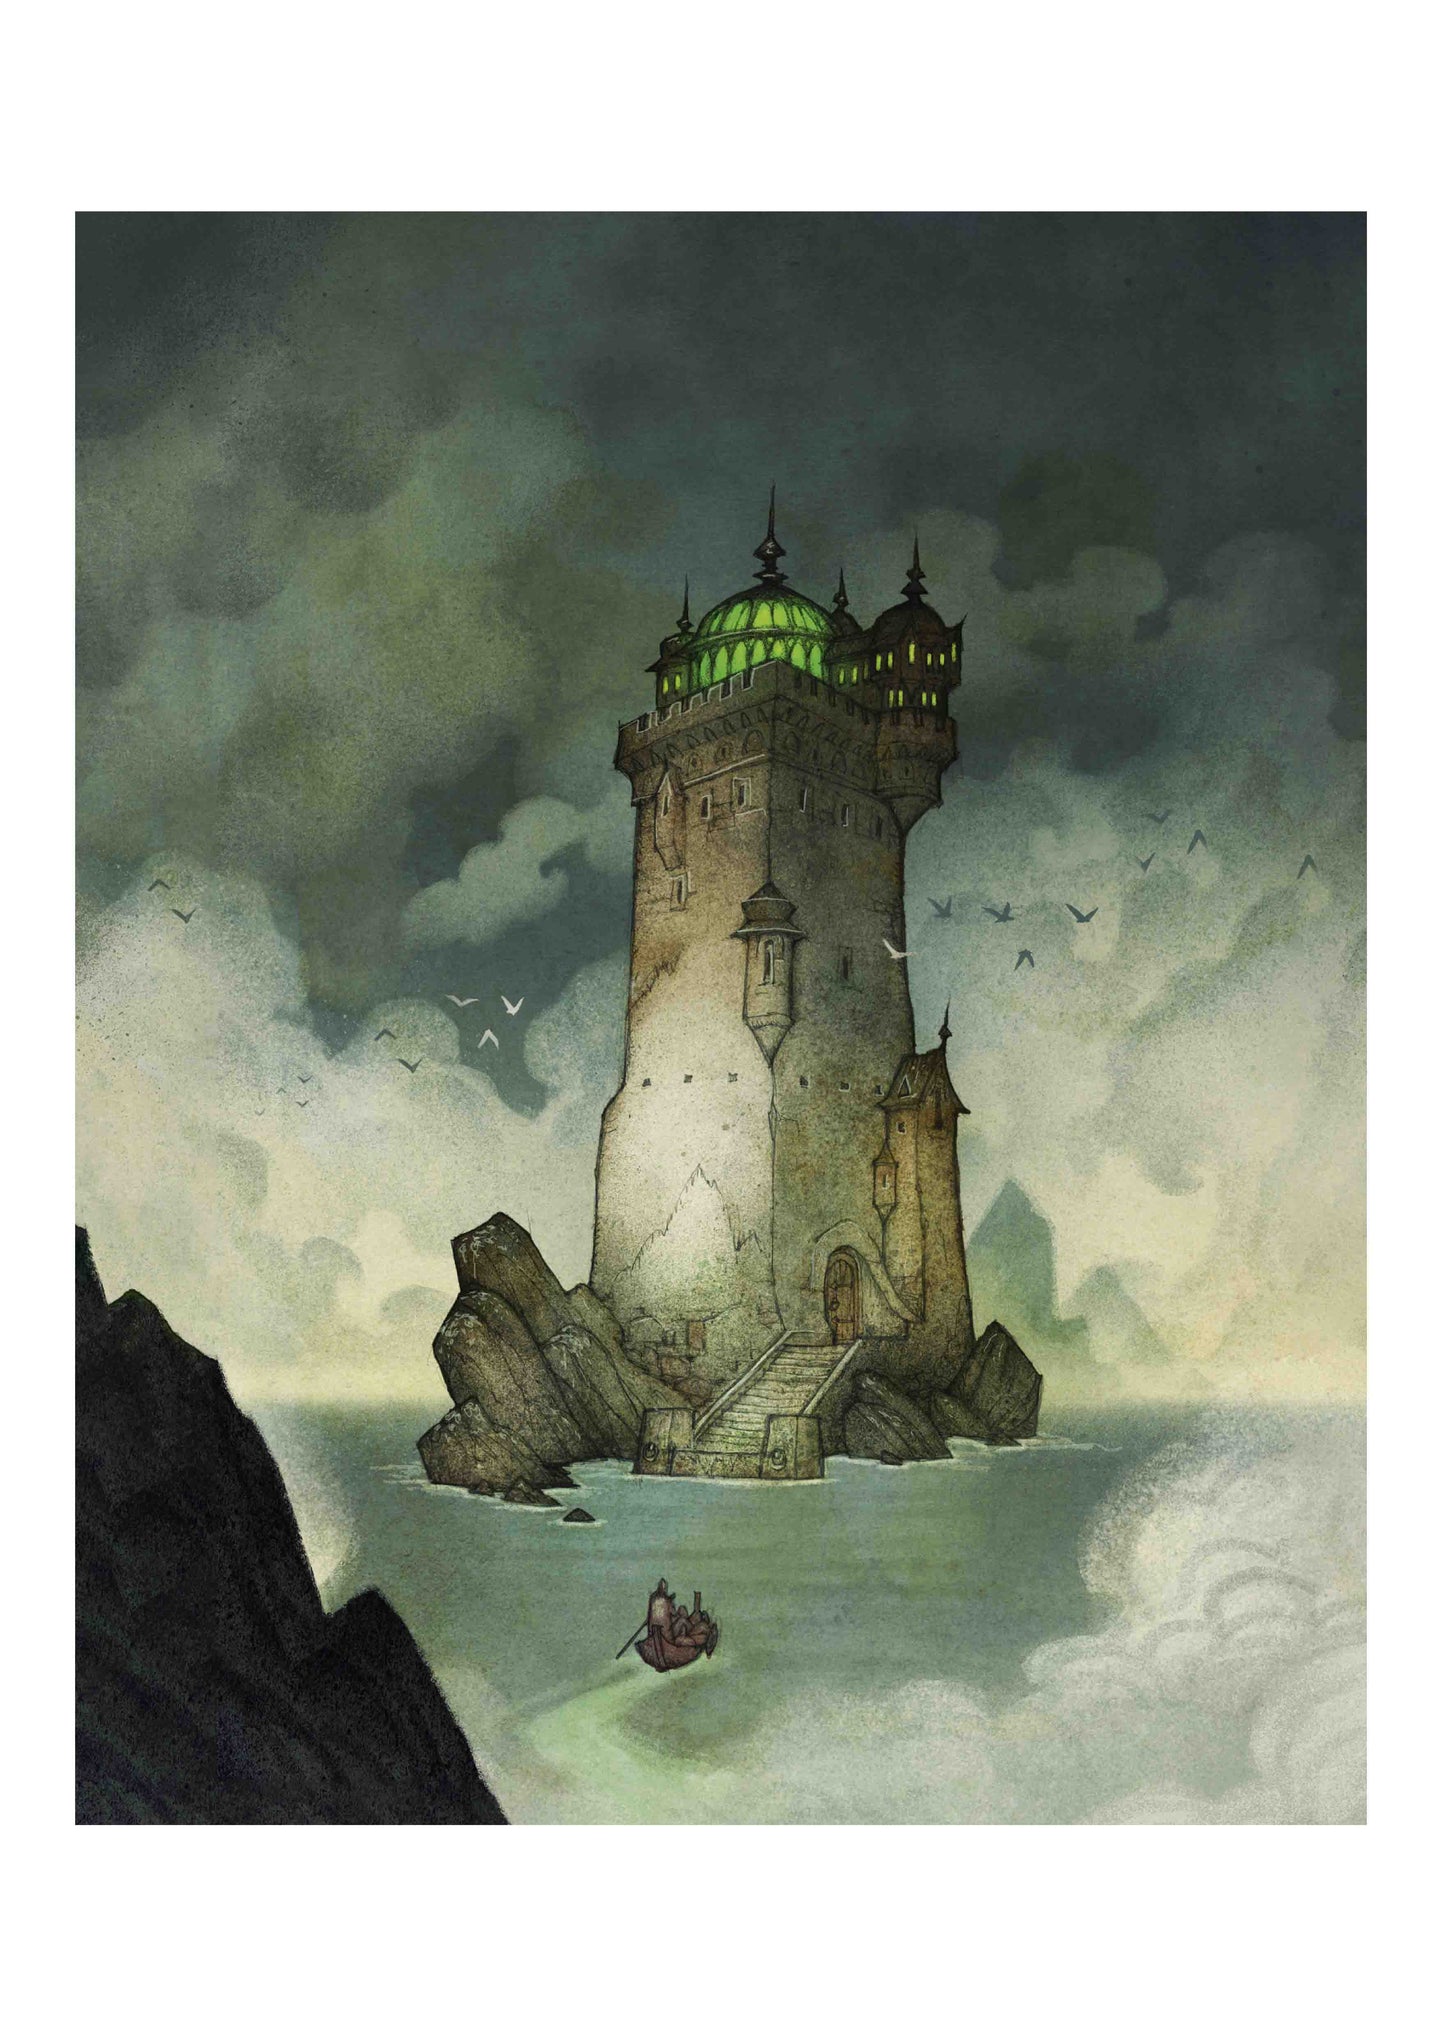 THE SINKING TOWER - SIGNED ART PRINT